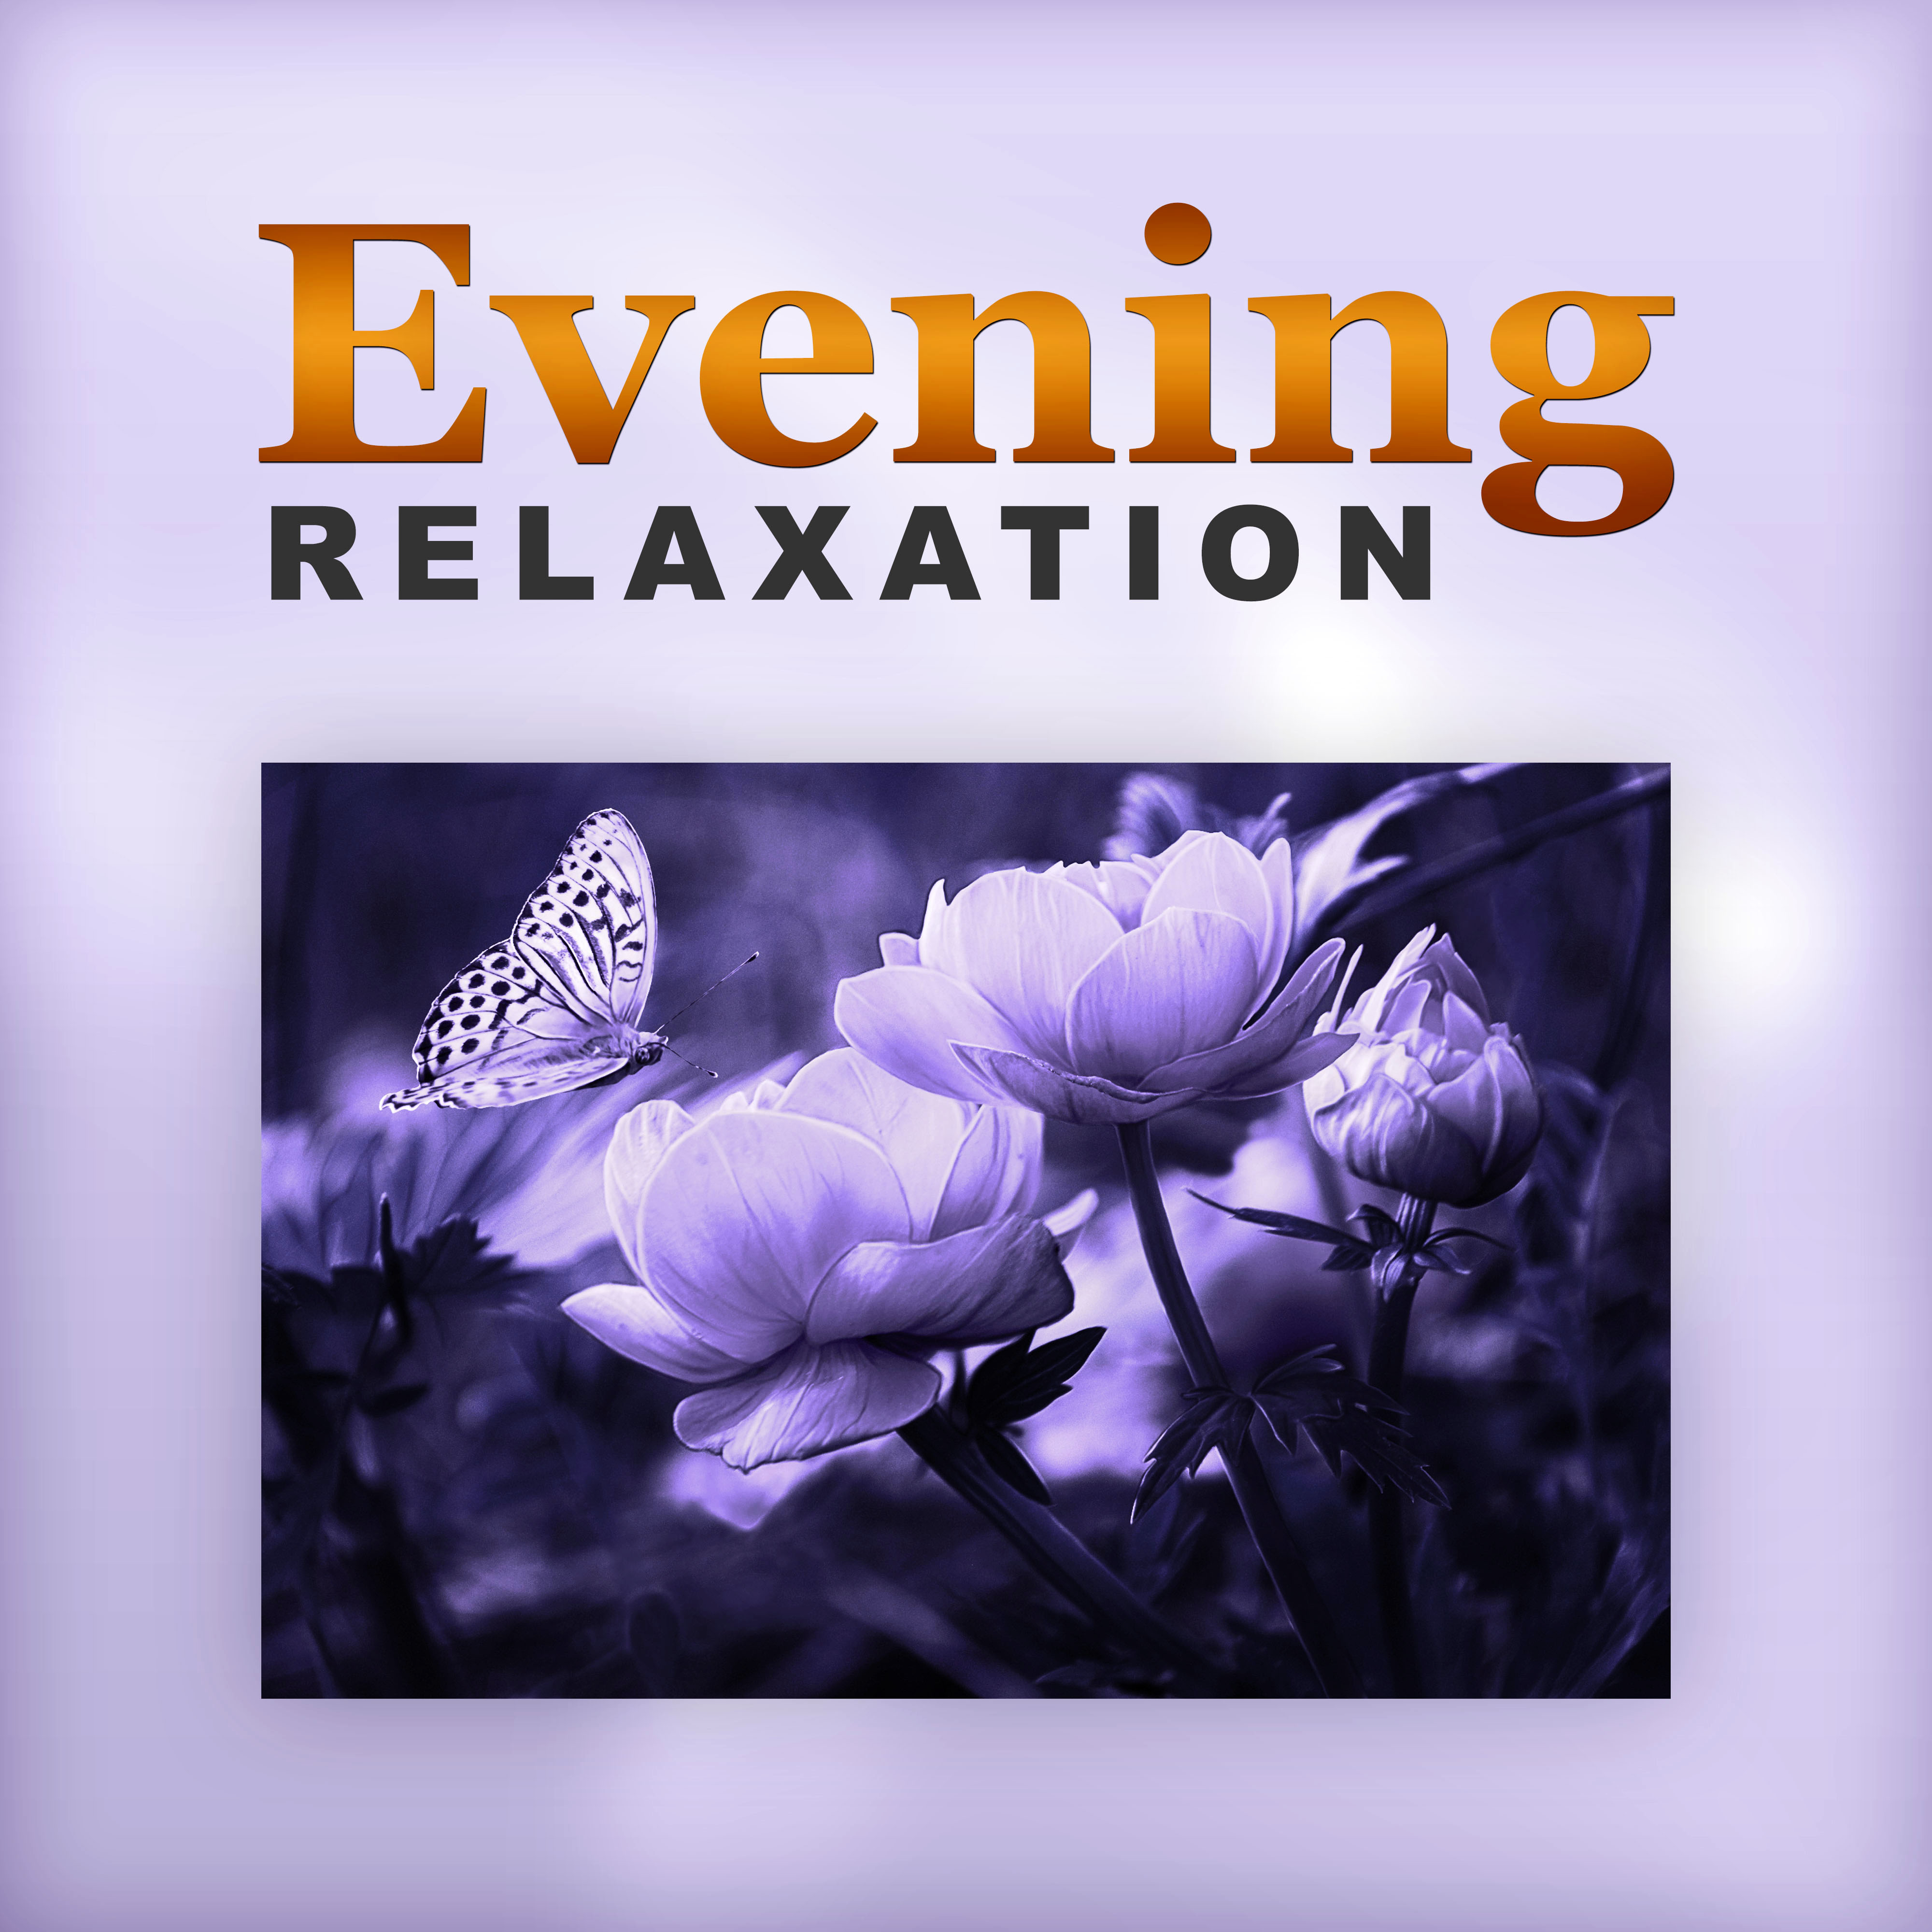 Evening Relaxation – Music to Rest, Relaxation After Work, Quiet Evening, Bach, Beethoven, Mozart